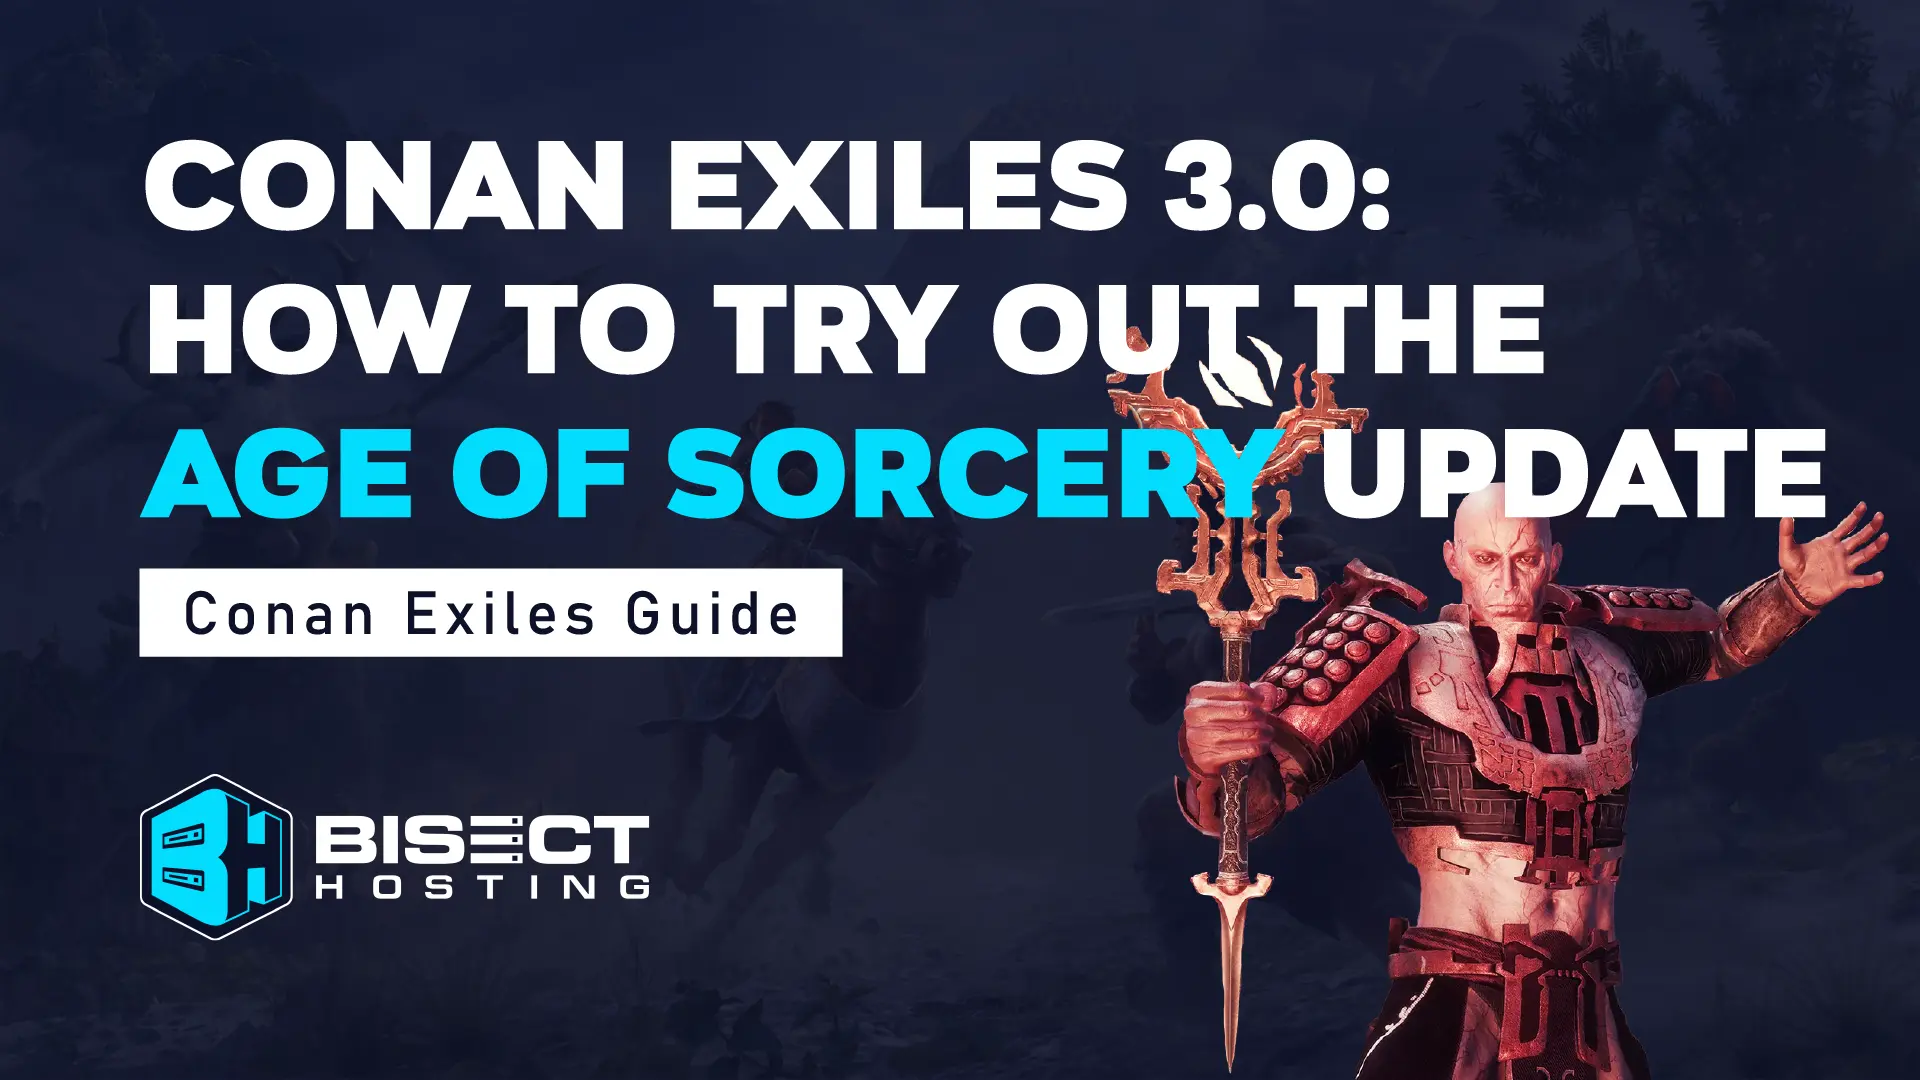 Conan Exiles 3.0: How to Try Out the Age of Sorcery Update